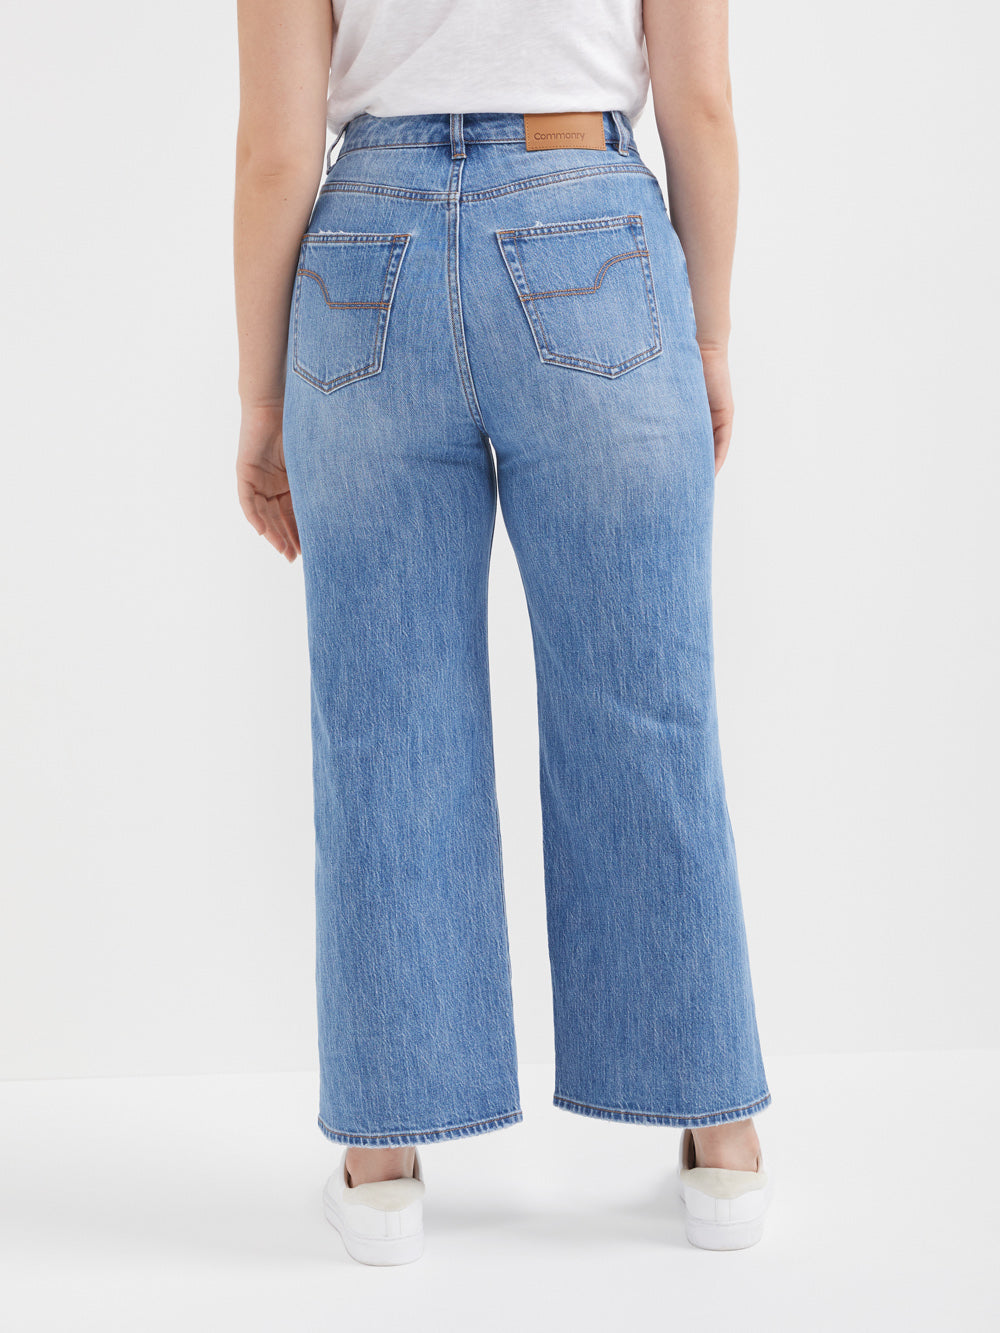 The Crop Wide Leg Jean - Commonry